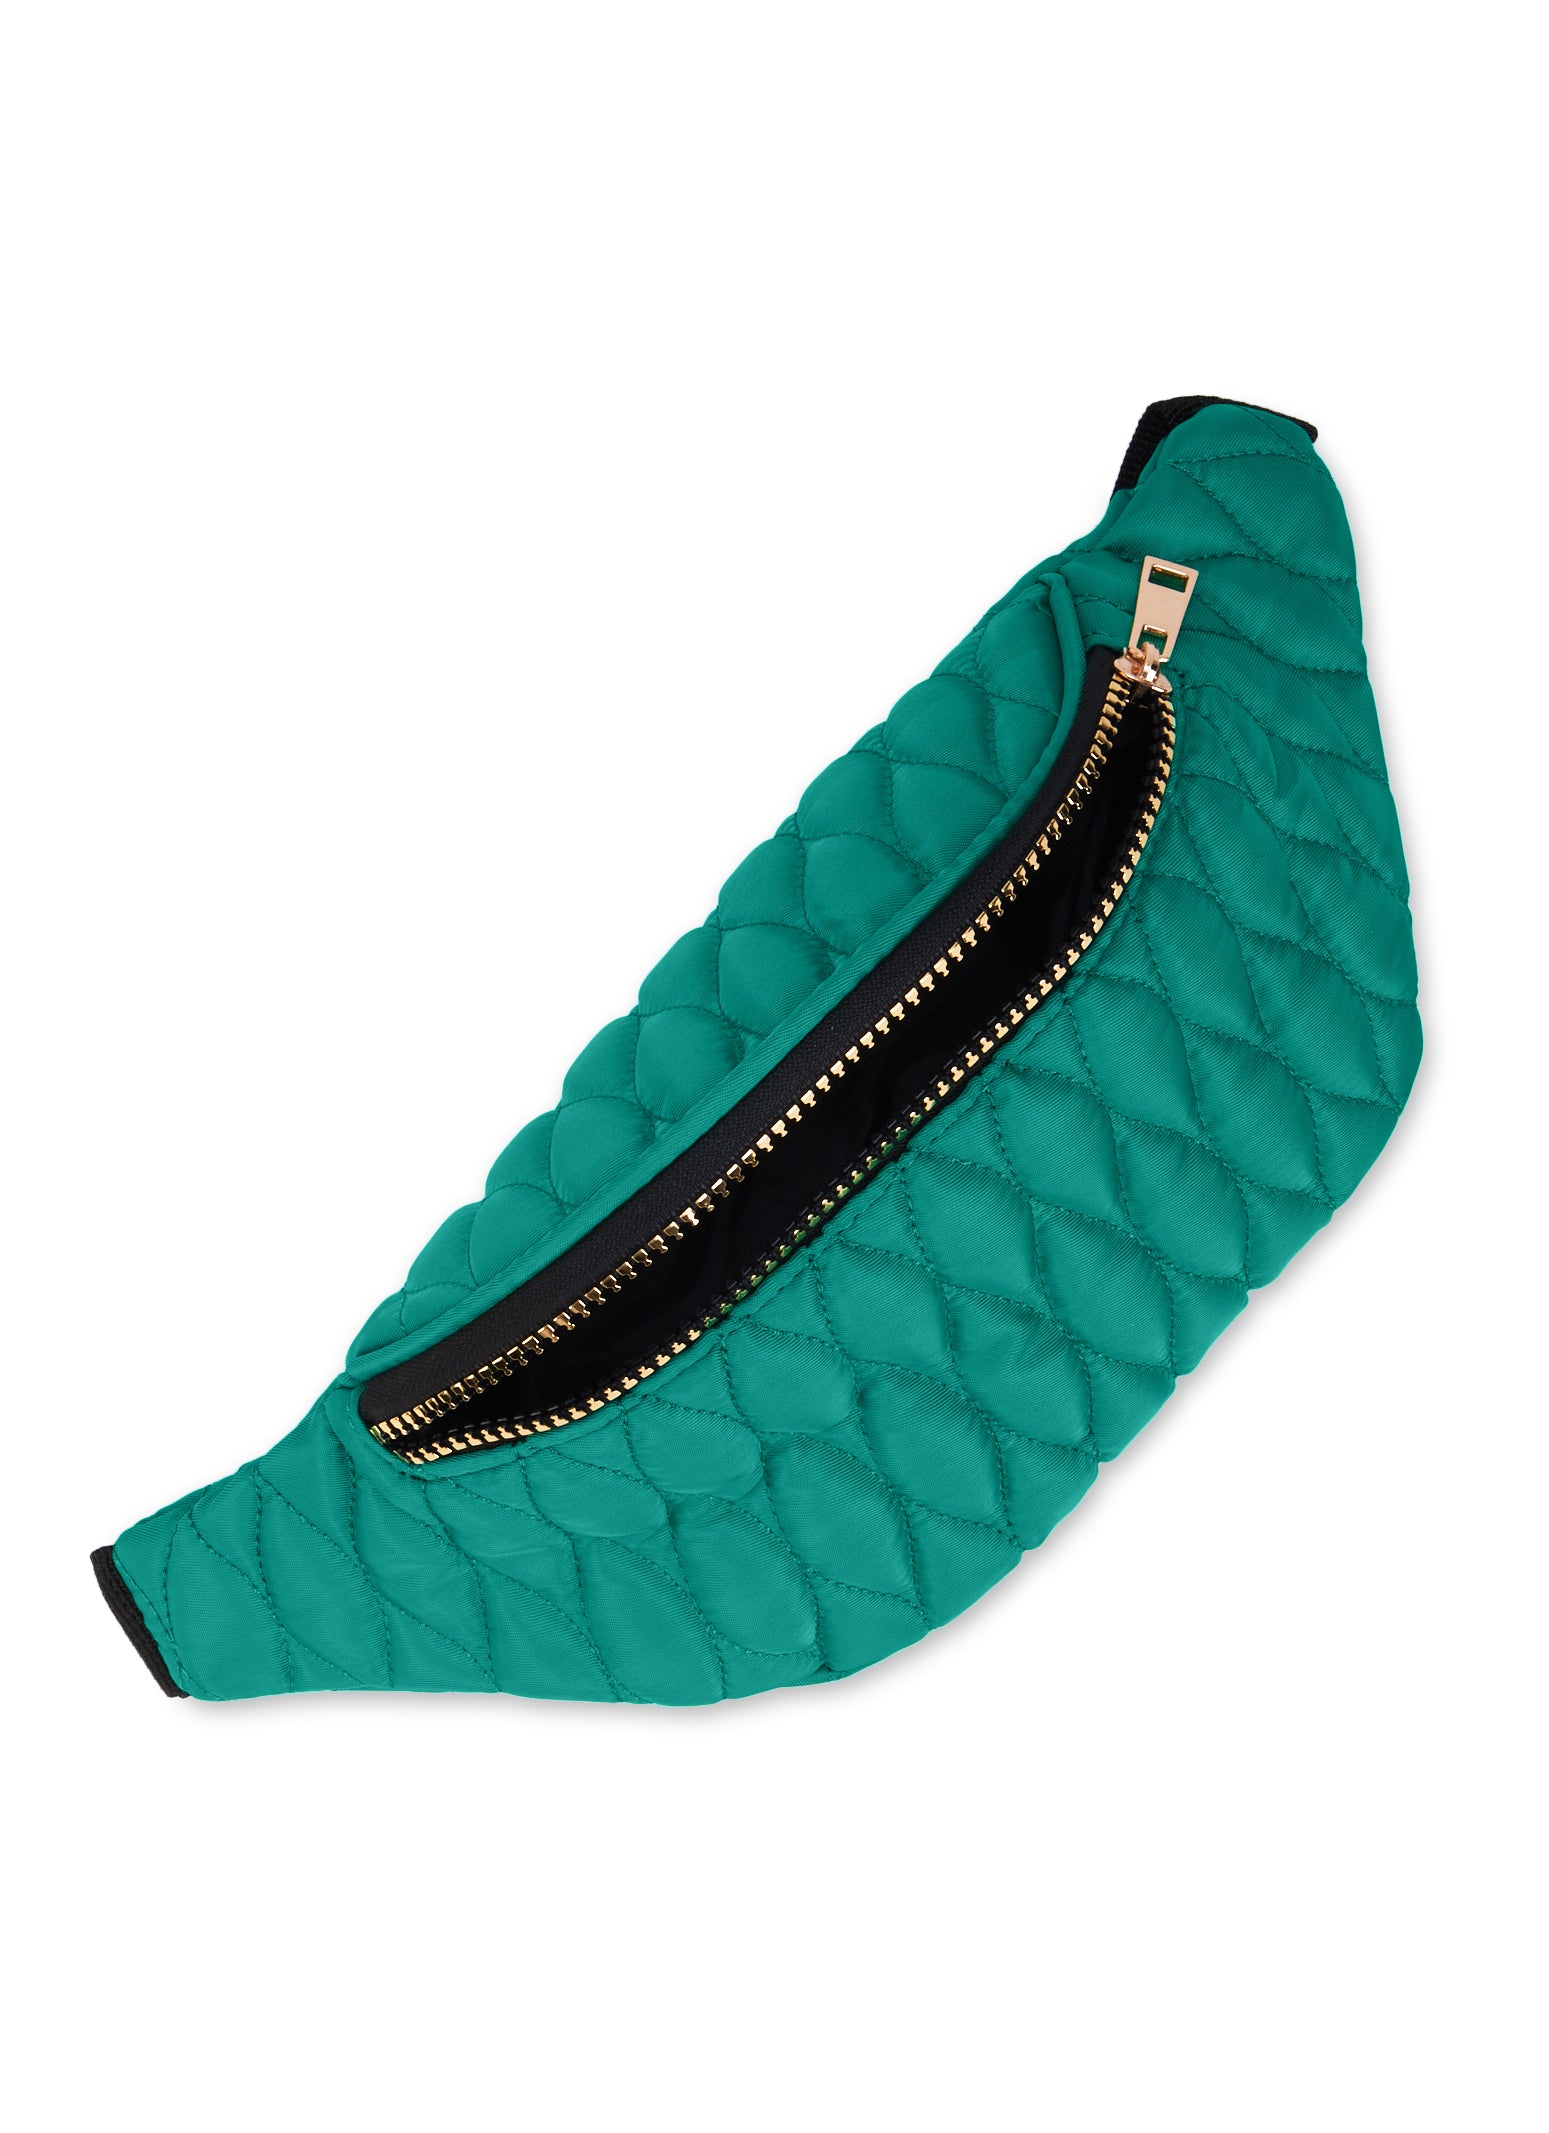 Nylon Quilted Fanny Pack